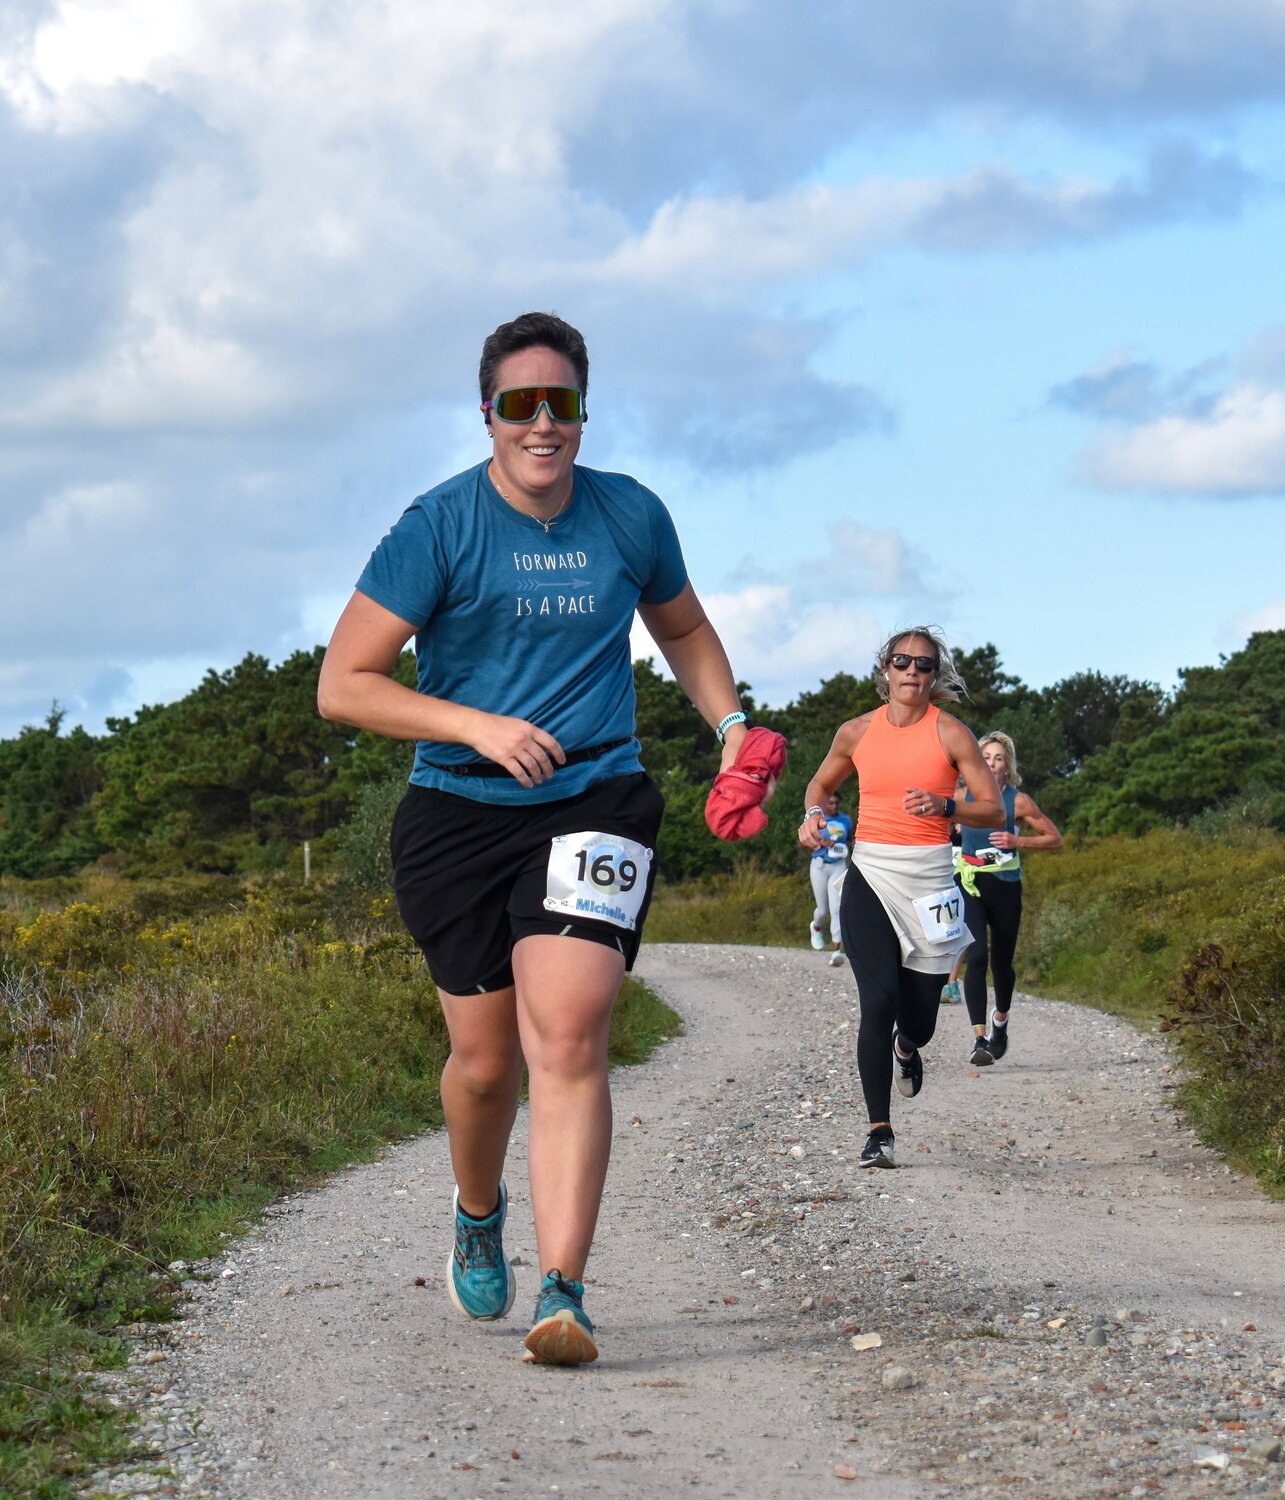 Sunday's Nantucket Half Marathon and 10K featured about 500 runners making their way through the Smooth Hummocks Coastal Preserve.